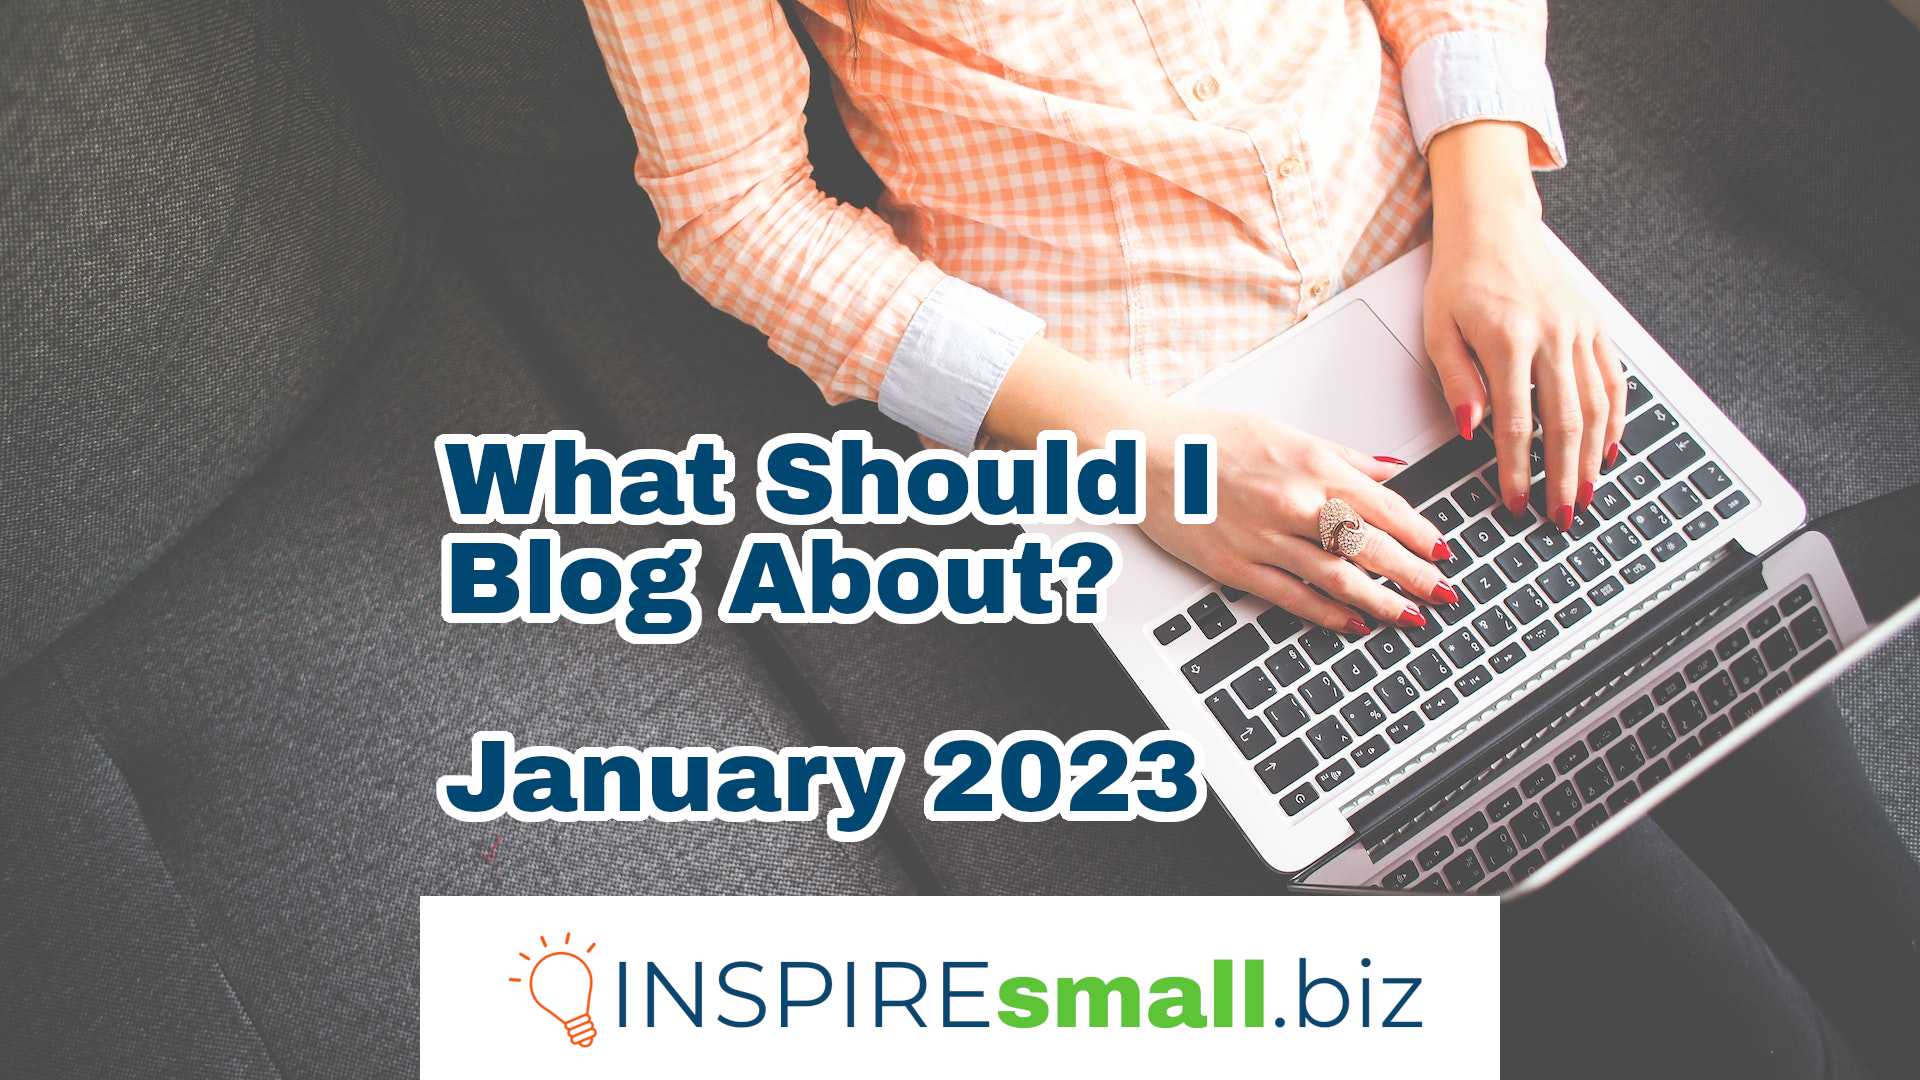 What Should I Blog About? January 2023